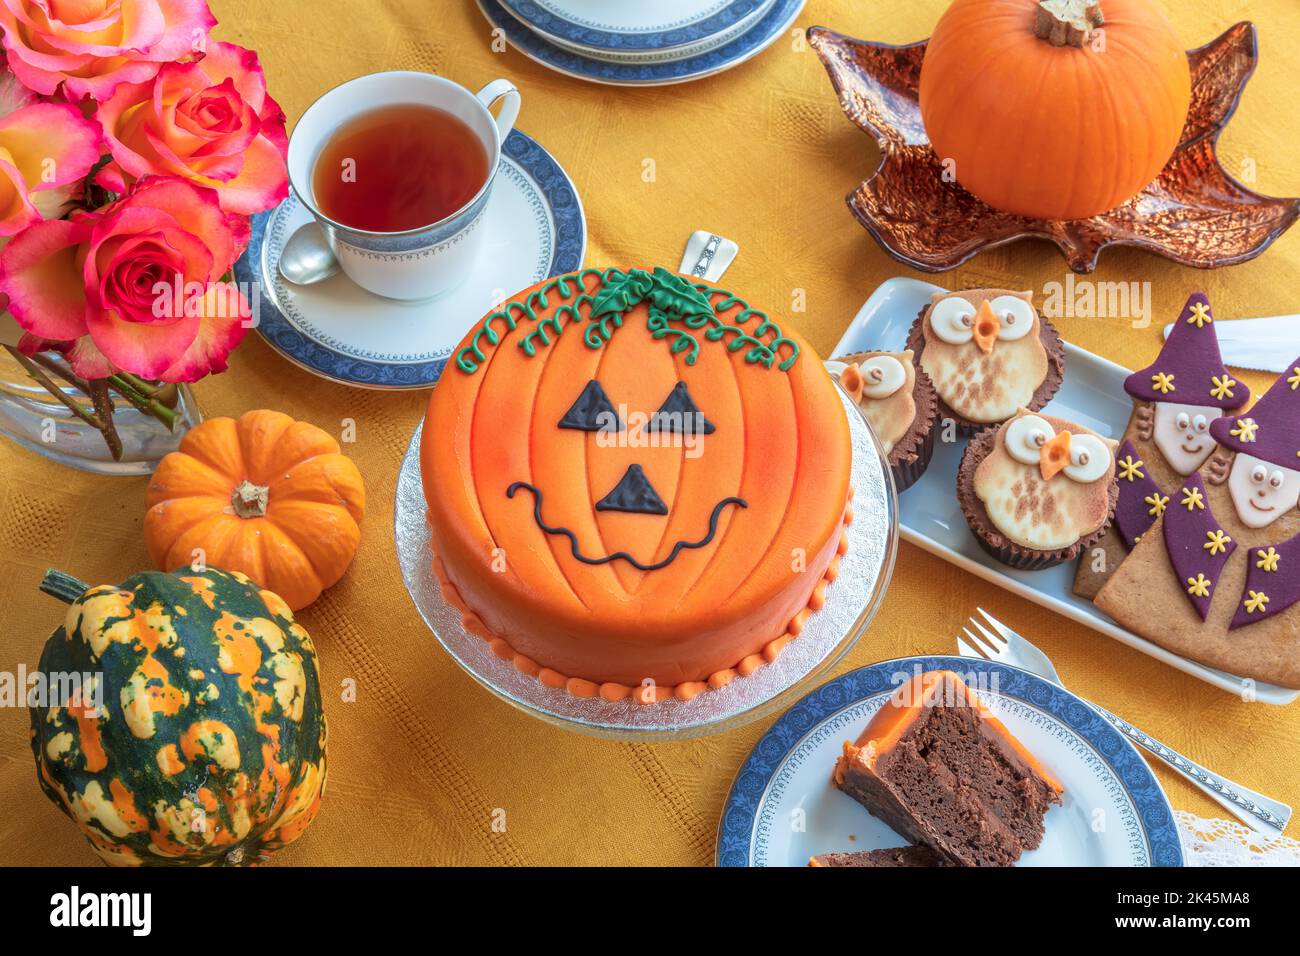 Tea time table set with novelty cakes decorated in Halloween theme. Stock Photo